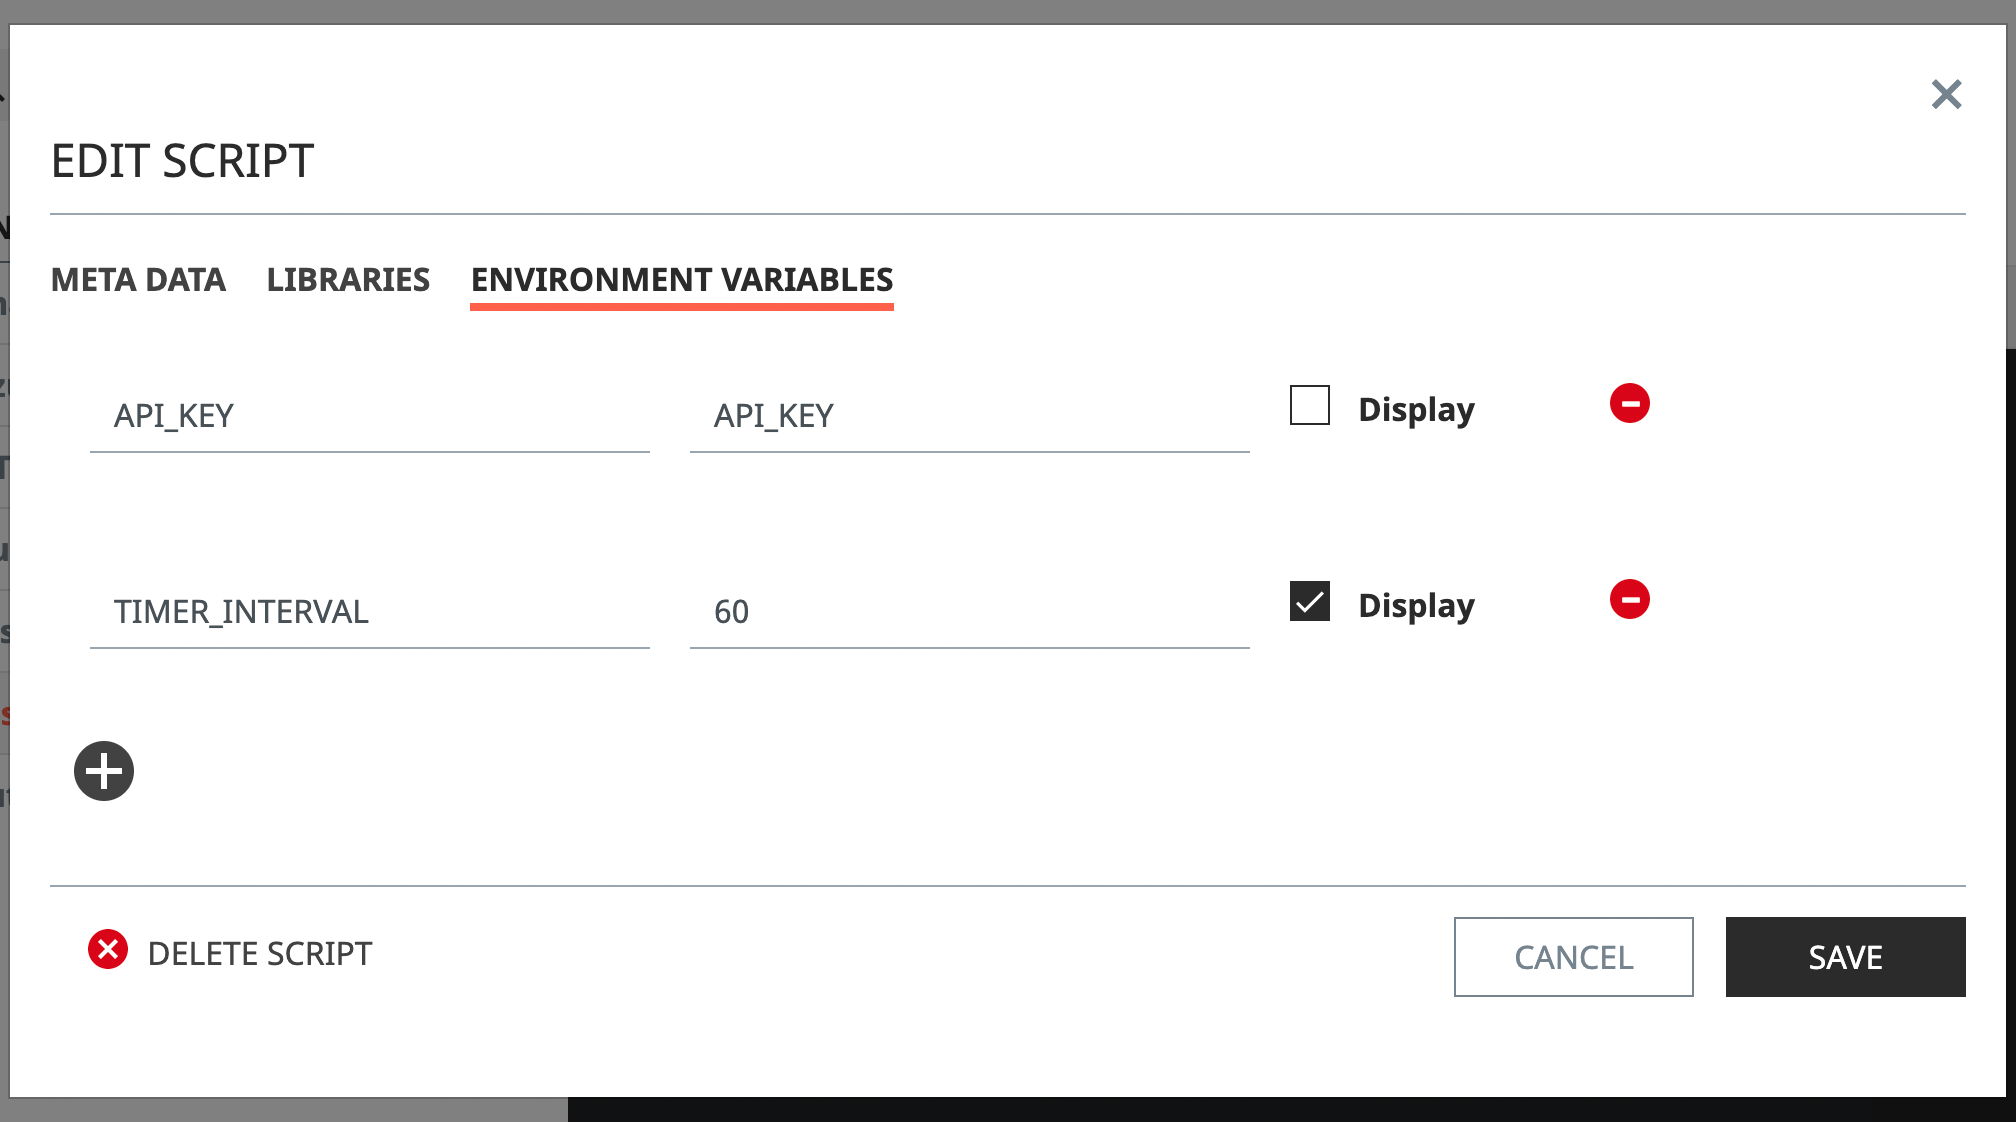 Select the setting tab and select the environment variable in the displayed modal window. You can see that you are entering Environment Variables.